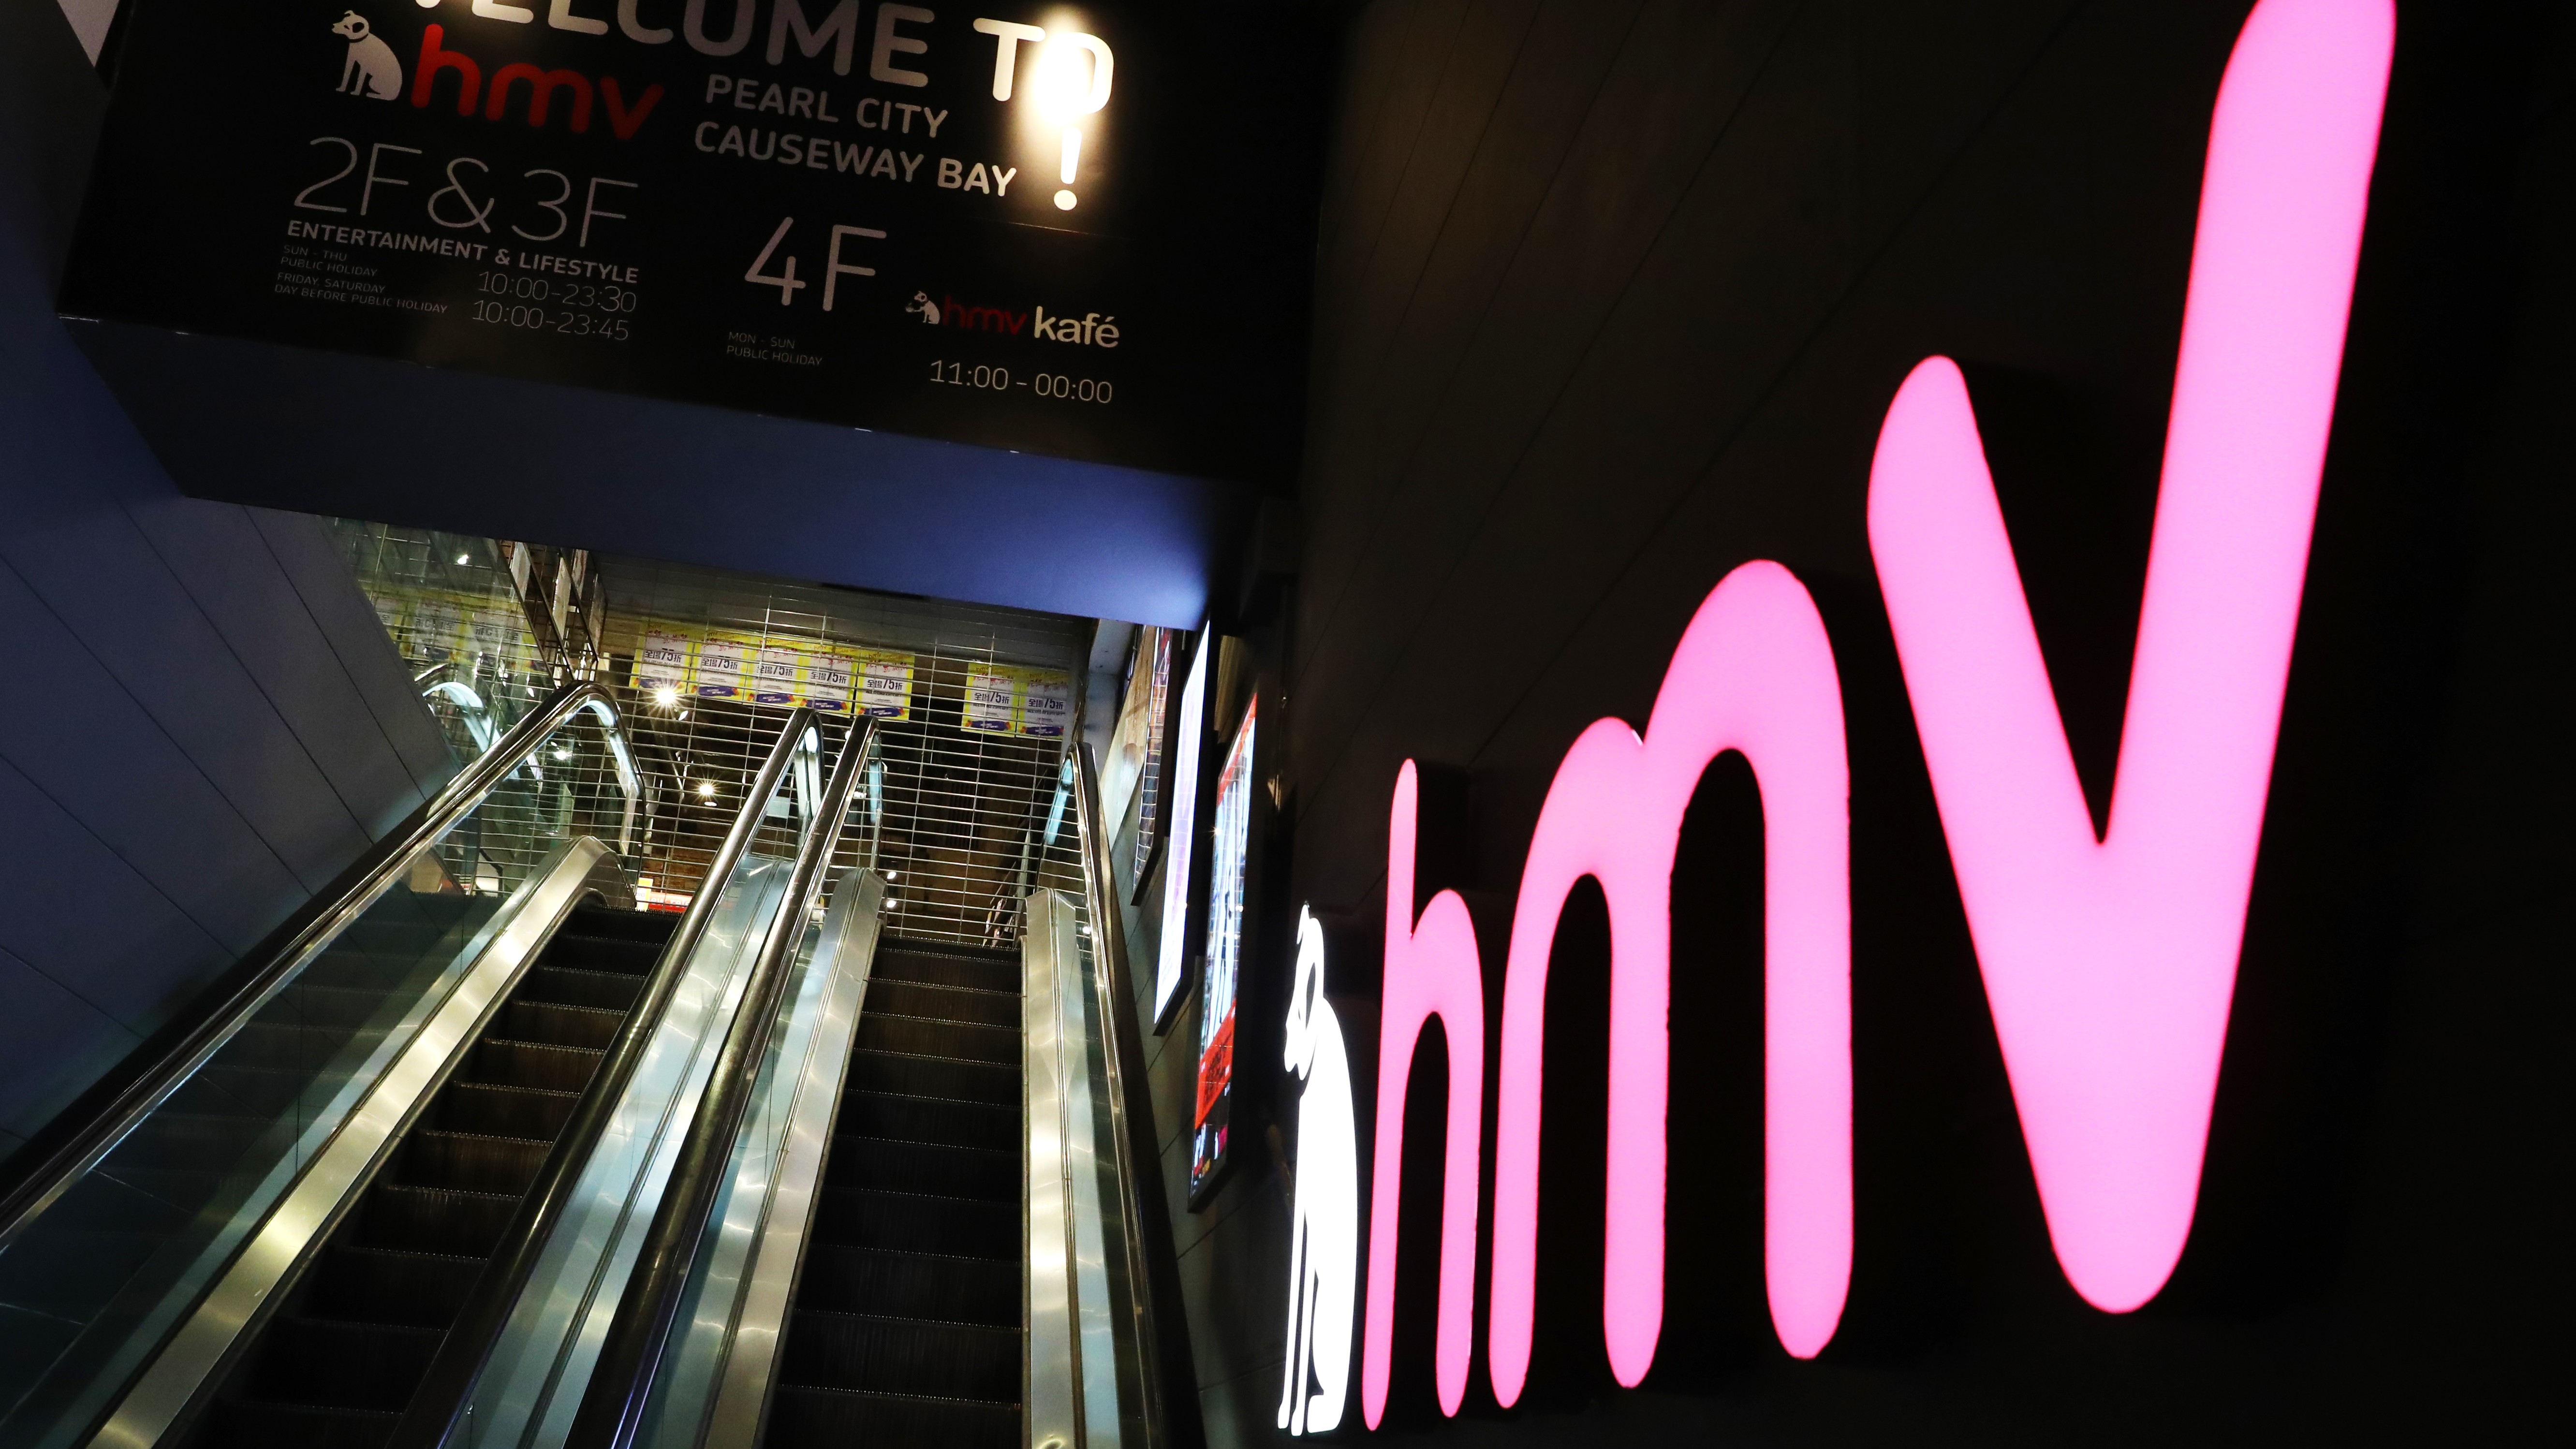 HMV’s flagship store in Causeway Bay closed down in December. Photo: Edmond So